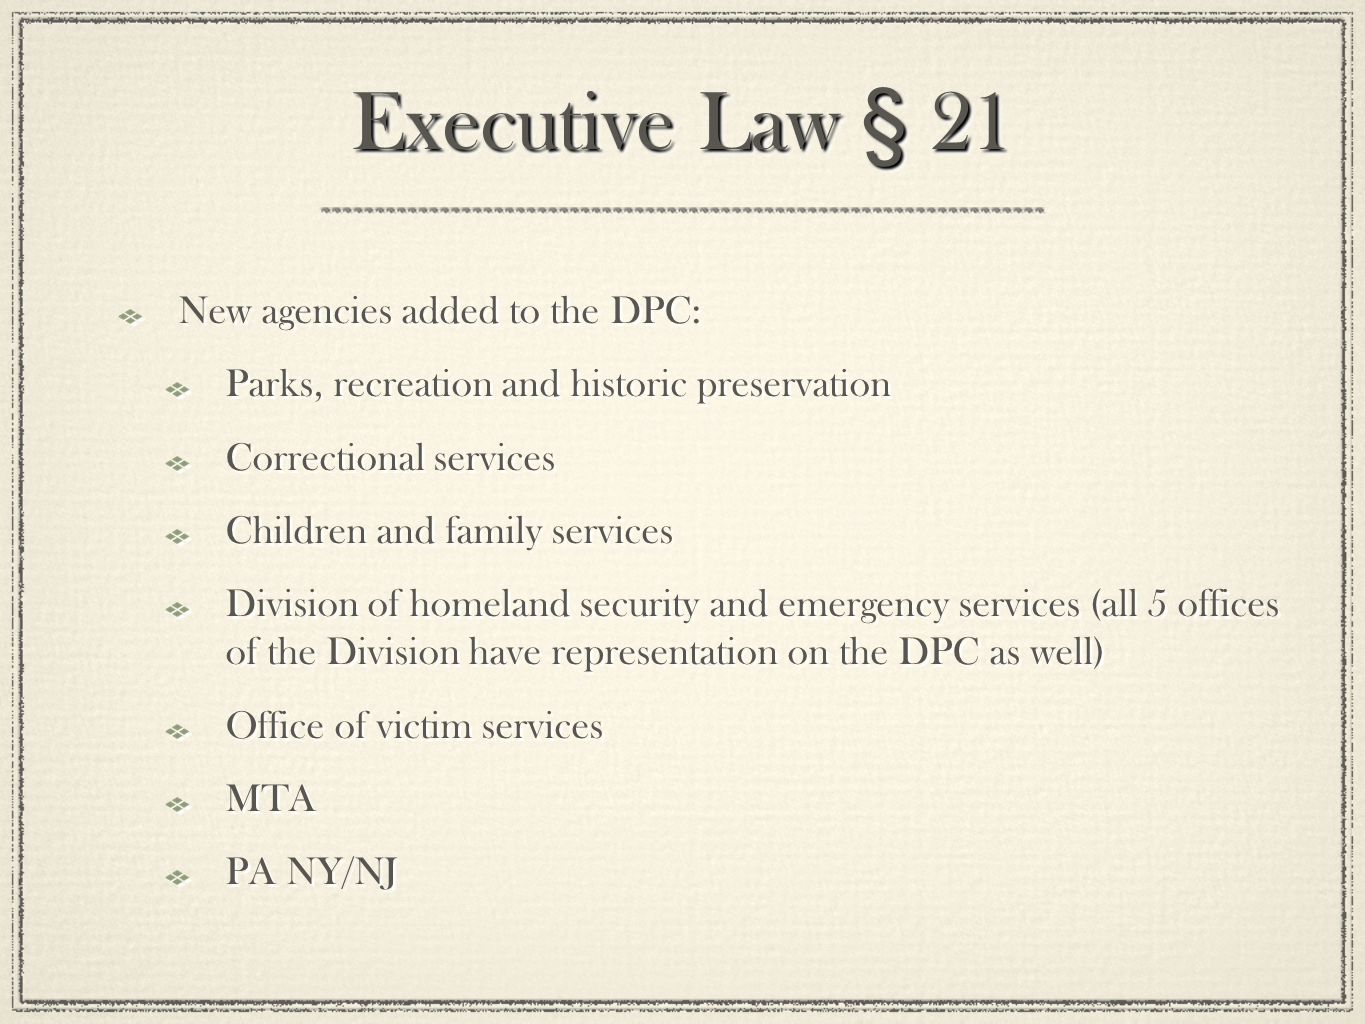 Executive Law § 21 New agencies added to the DPC: Parks, recreation and historic preservation Correctional services Children and family services Division of homeland security and emergency services (all 5 offices of the Division have representation on the DPC as well) Office of victim services MTA PA NY/NJ New agencies added to the DPC: Parks, recreation and historic preservation Correctional services Children and family services Division of homeland security and emergency services (all 5 offices of the Division have representation on the DPC as well) Office of victim services MTA PA NY/NJ